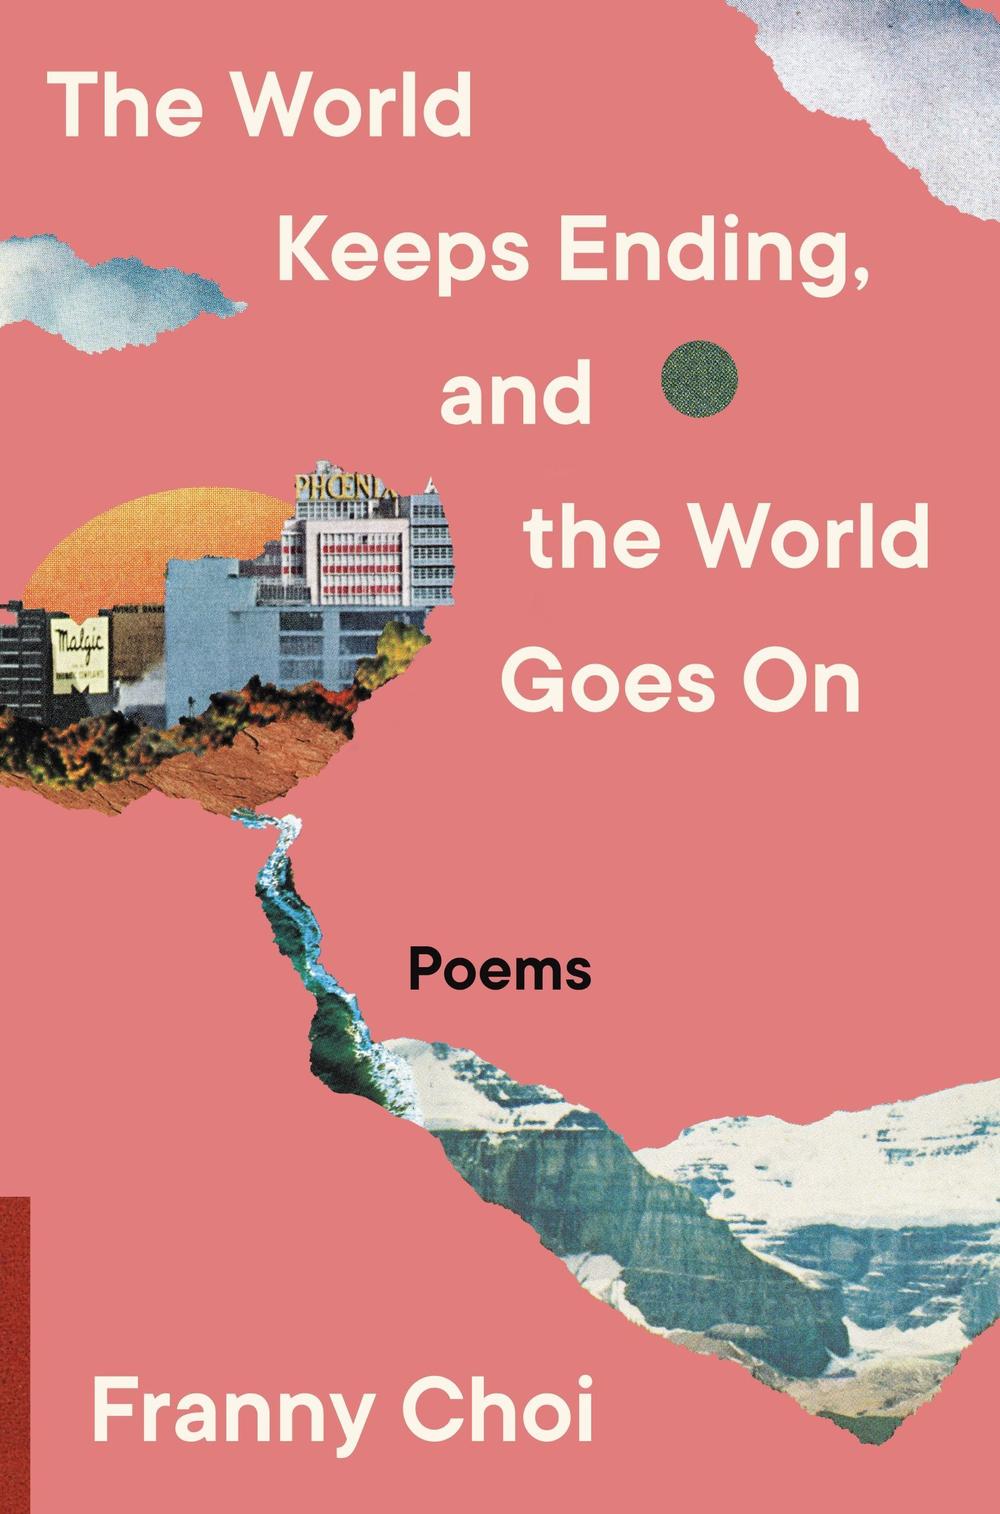 The collection of poems published this week.